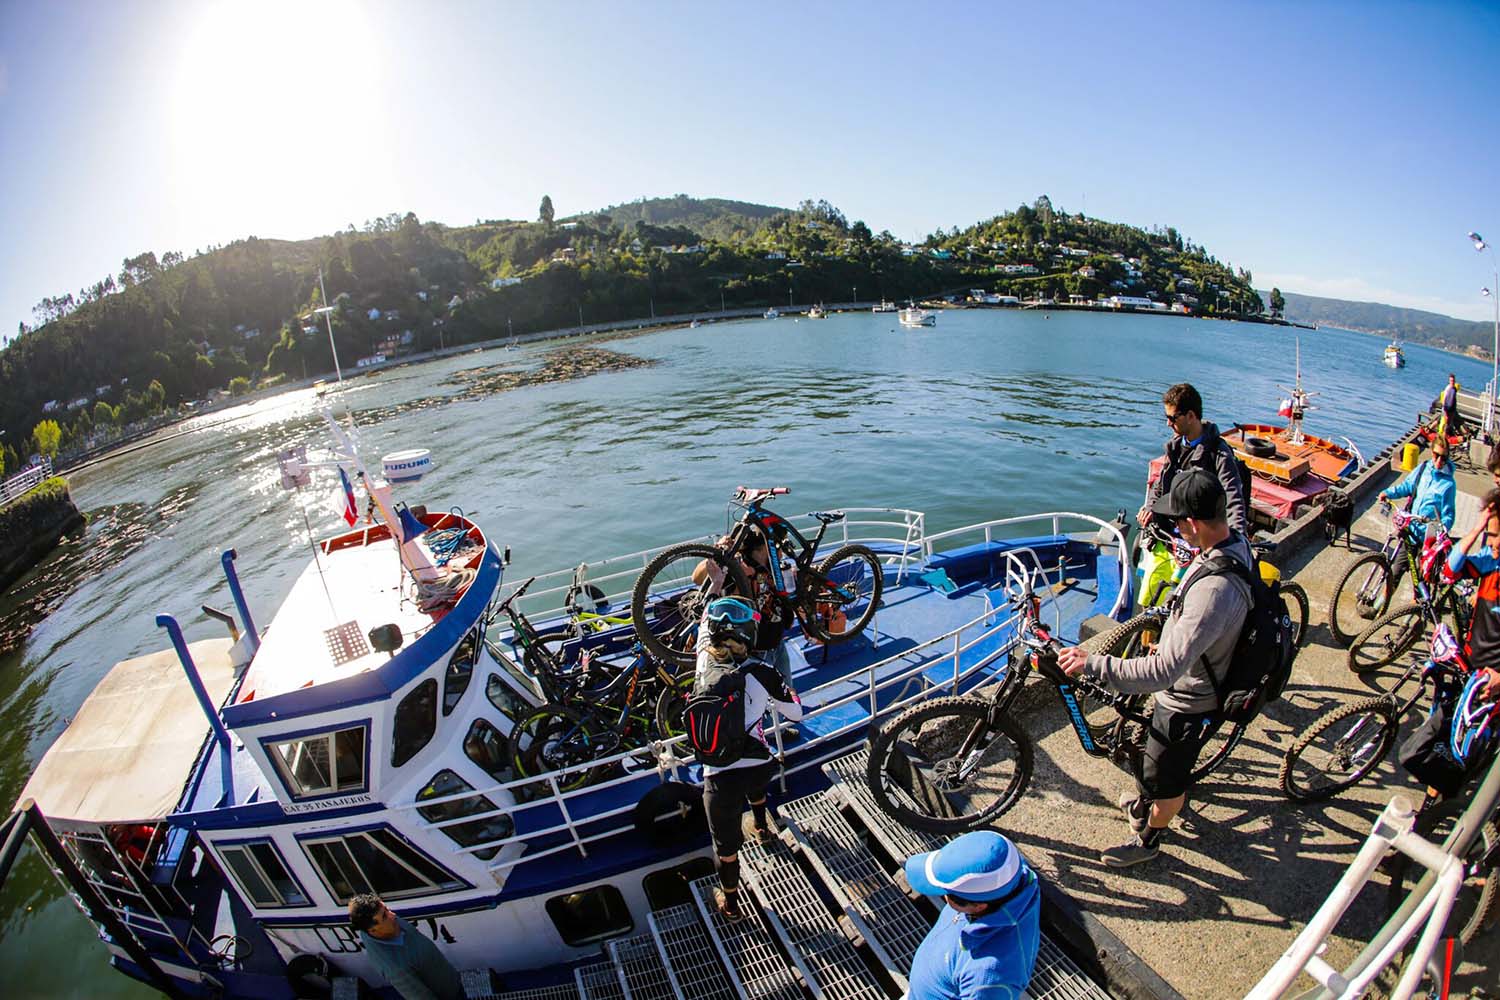 Loading up the ferry. Photo: Lapierre- Jeremie Reuiller